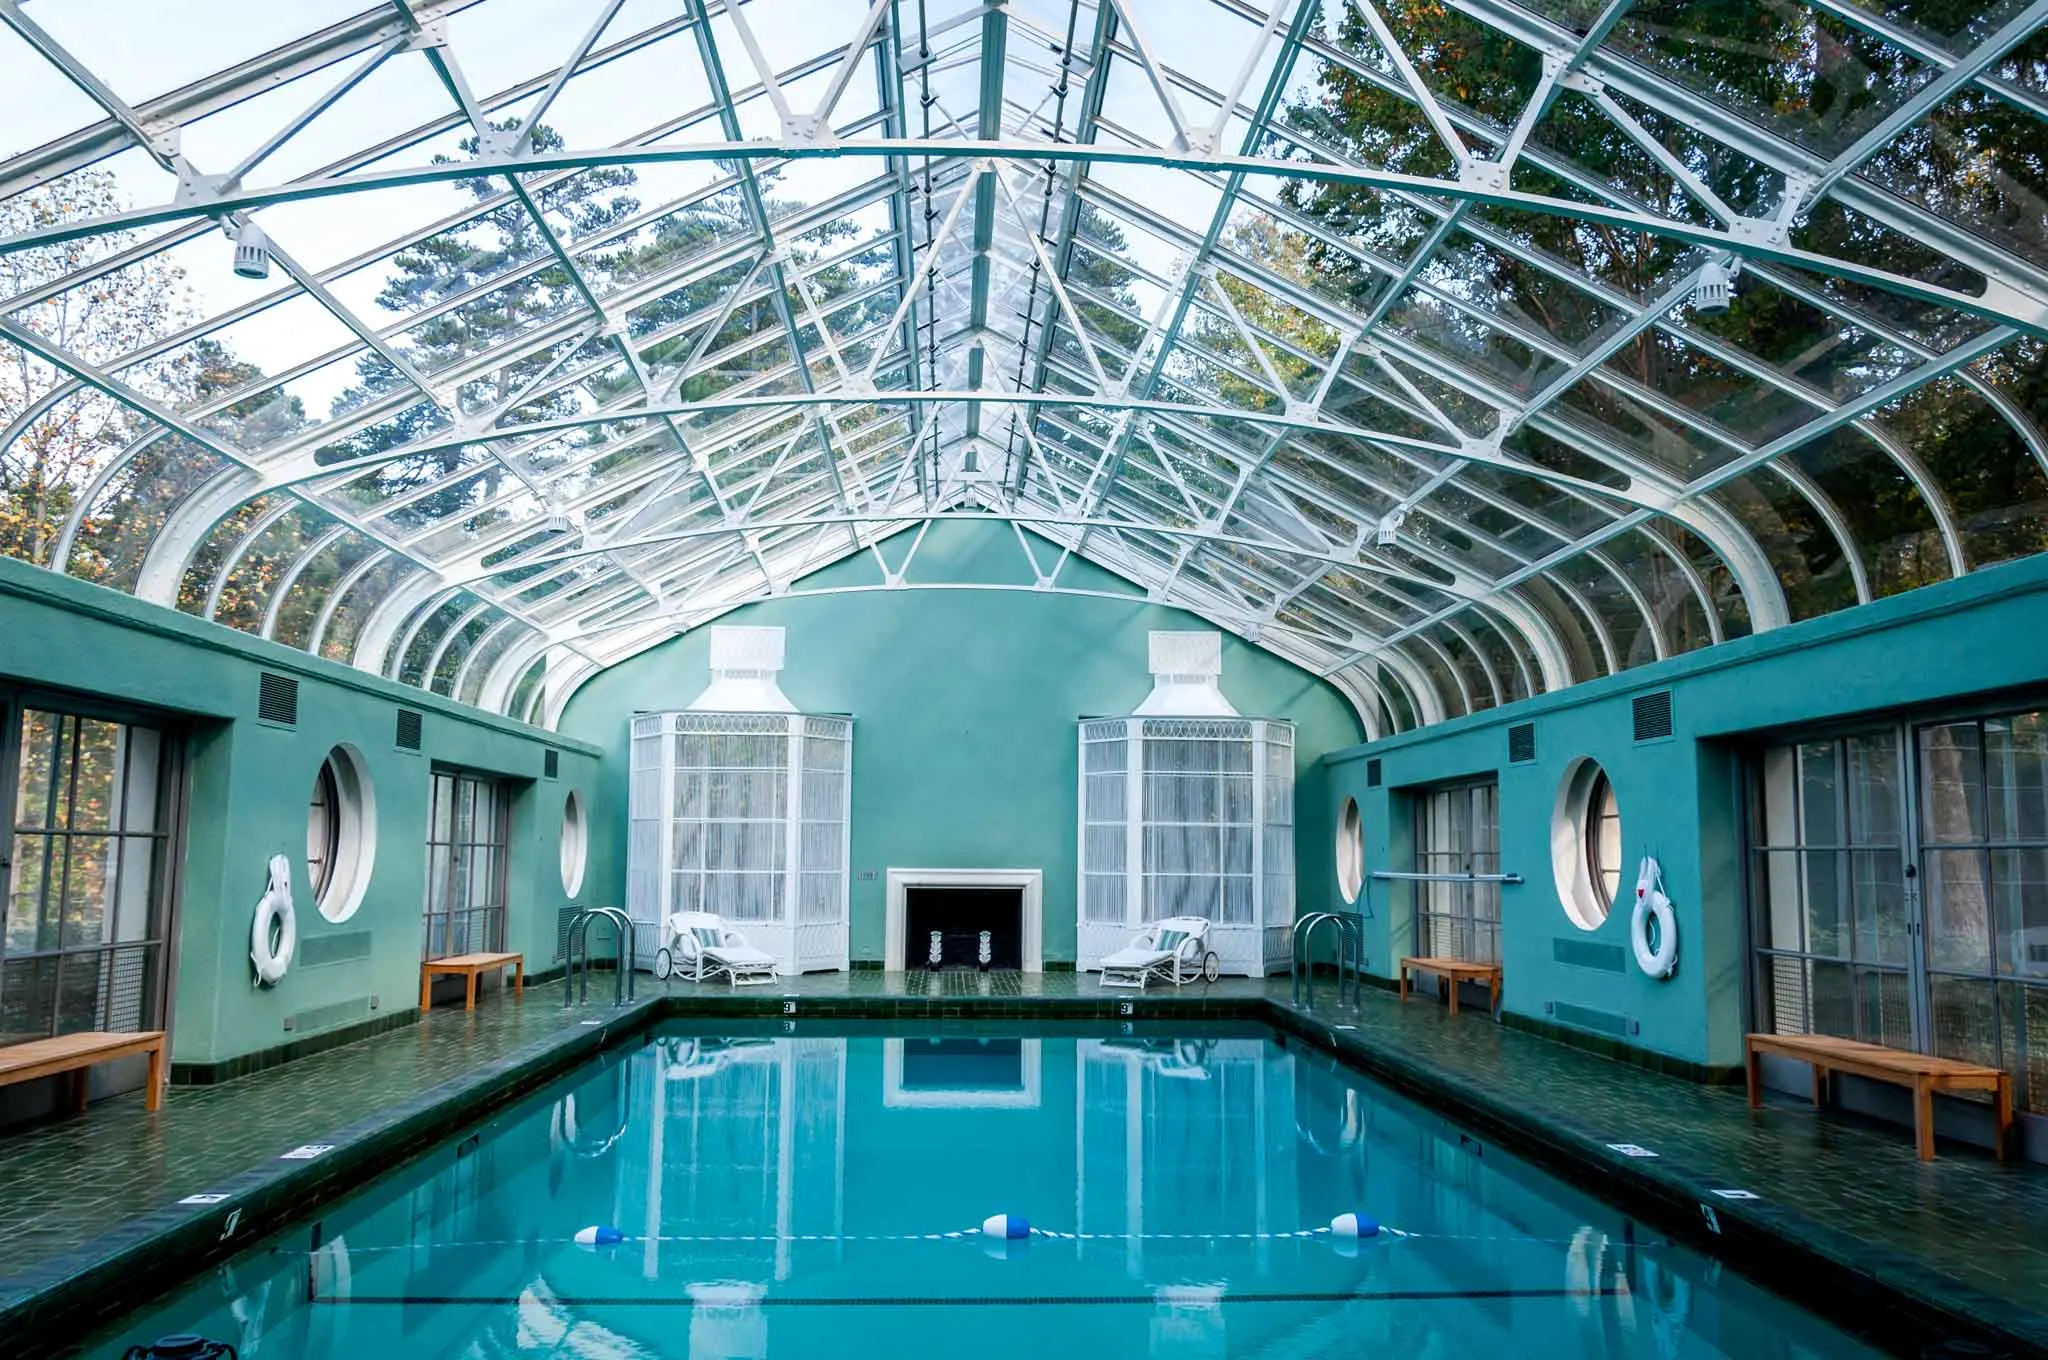 Indoor pool in room with a glass ceiling 